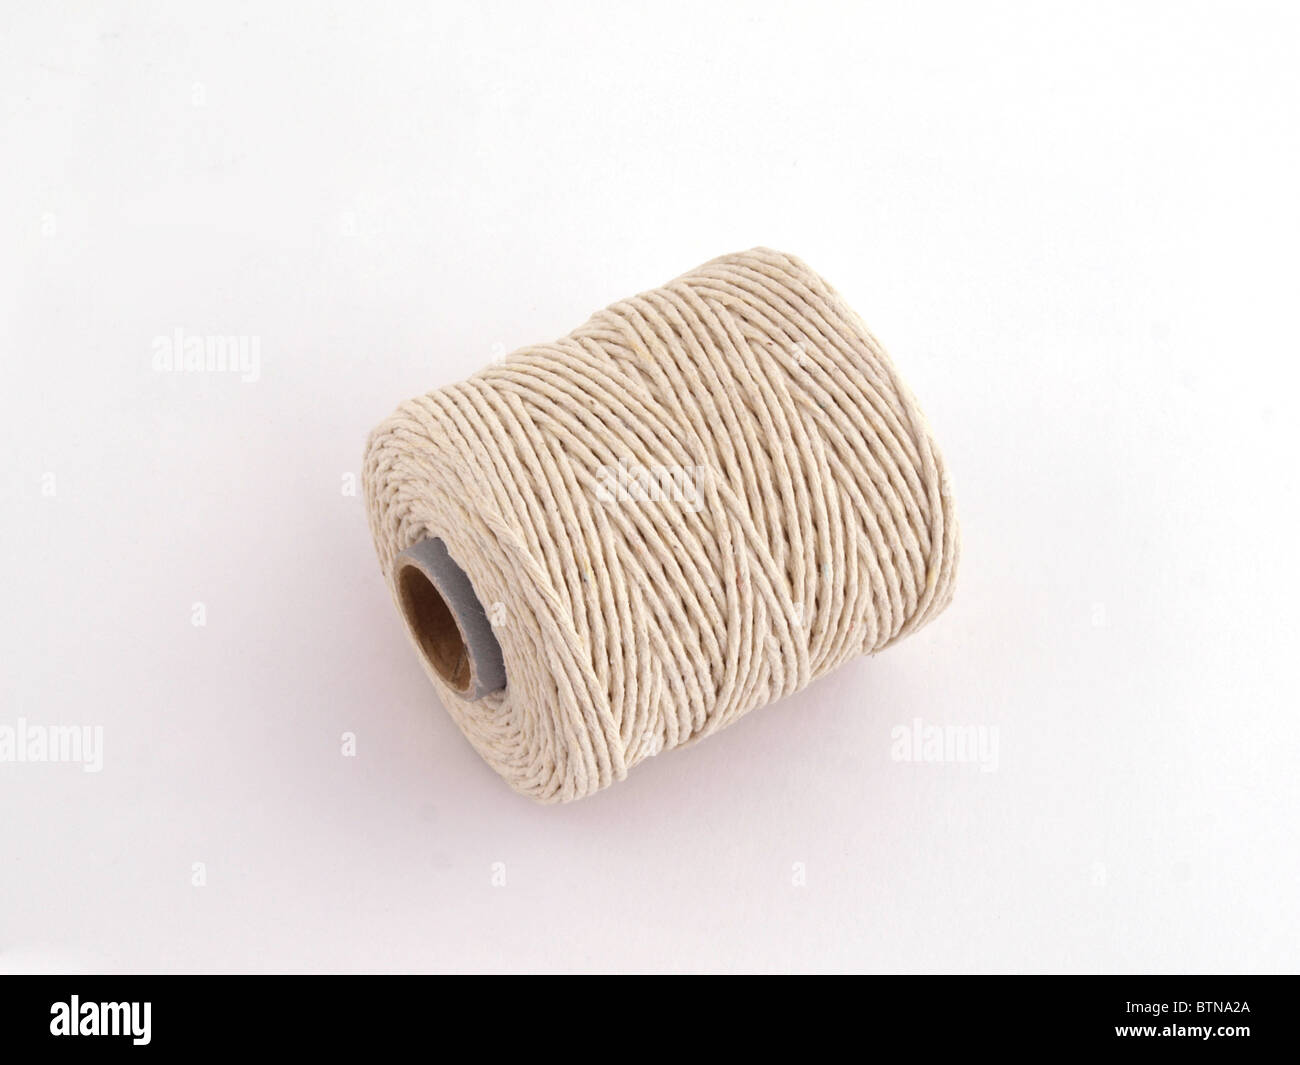 Ball of string or twine on a plain white background. Stock Photo